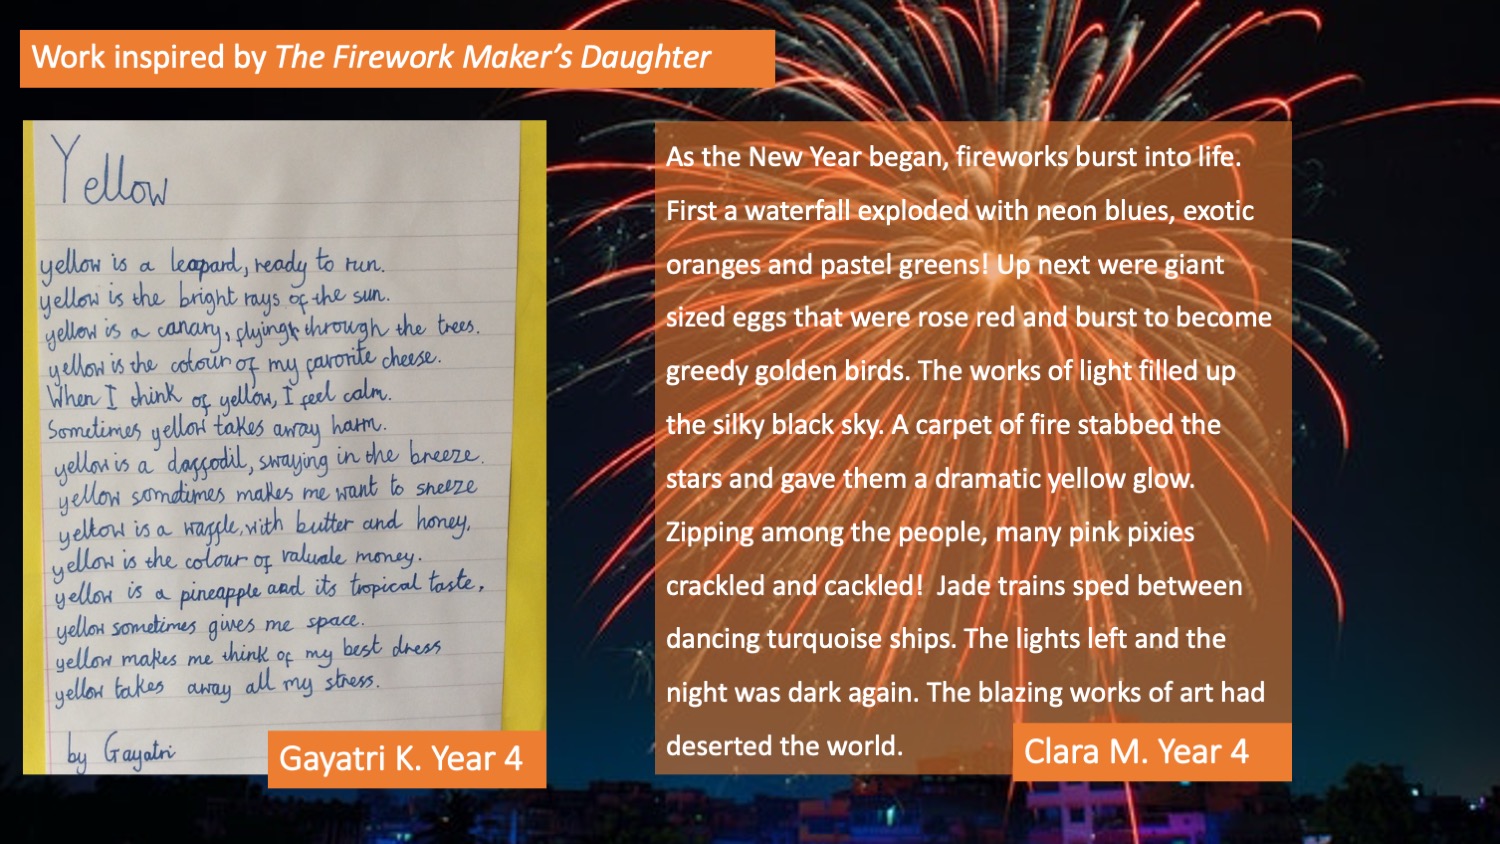 Work inspired by The Firework Maker's Daughter